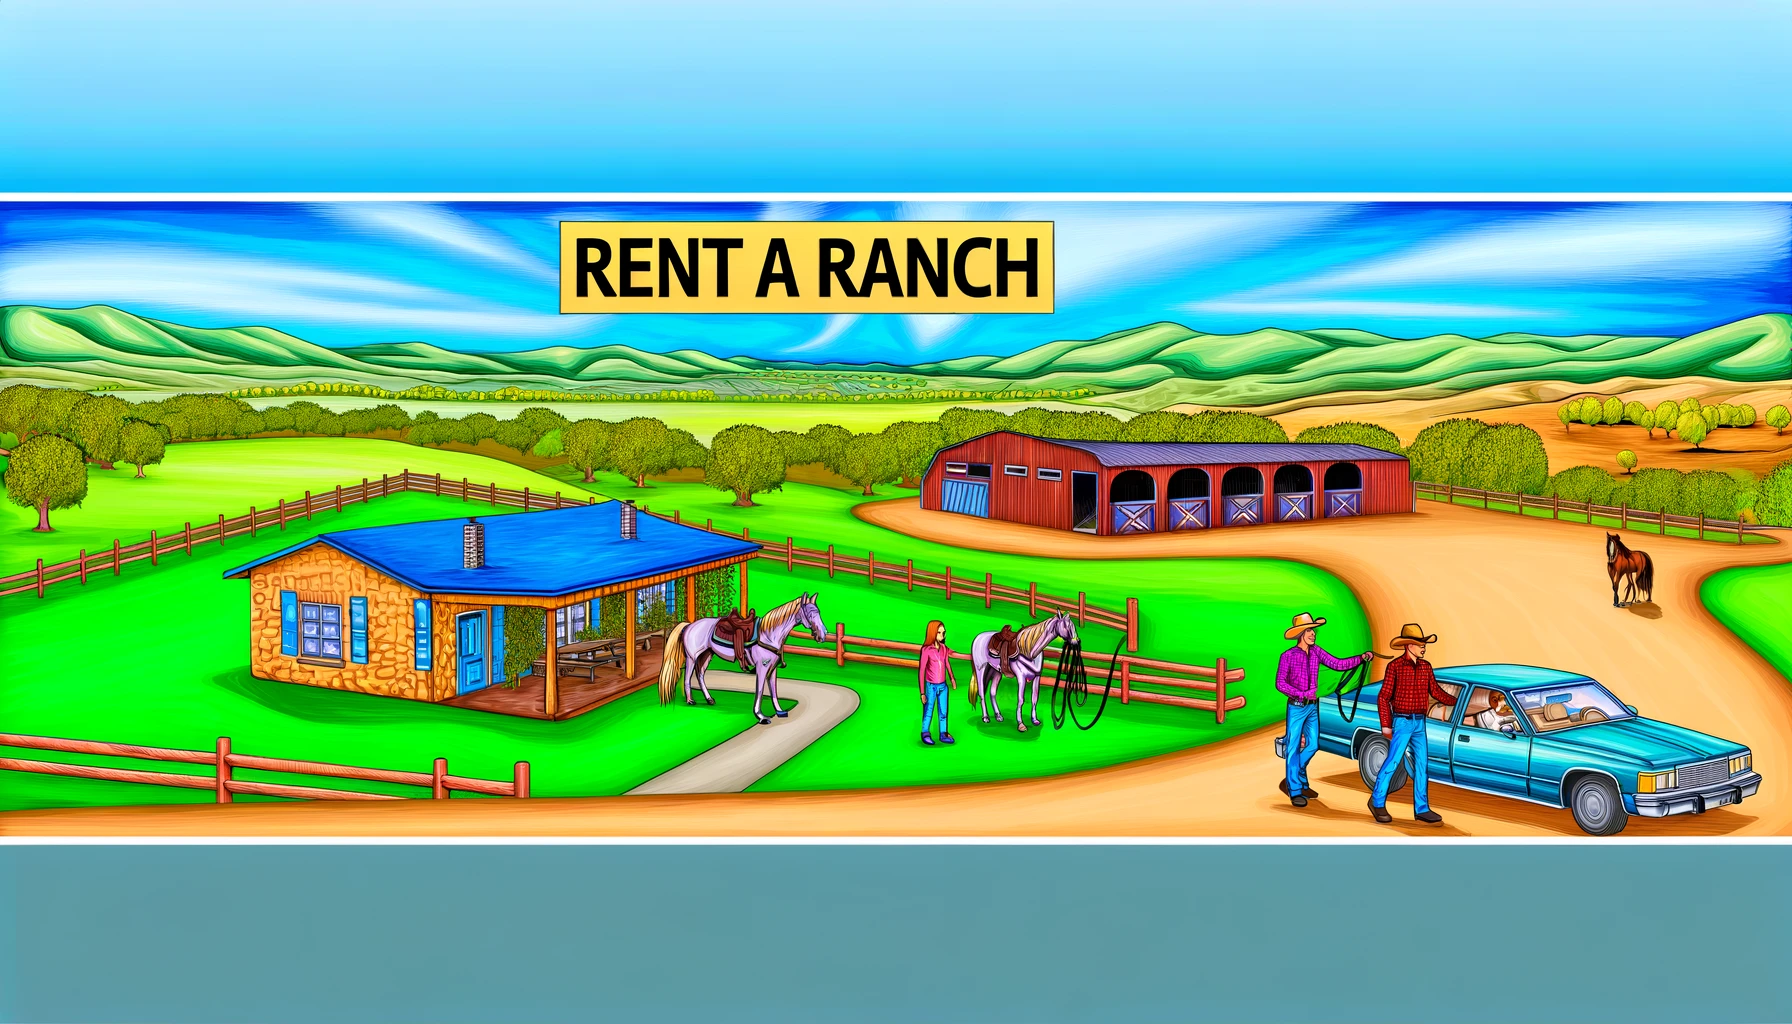 Rent a Ranch - A vivid and detailed wide illustration depicting the concept of 'Rent a Ranch'. The scene shows a picturesque ranch available for rent, featuring a co (2)